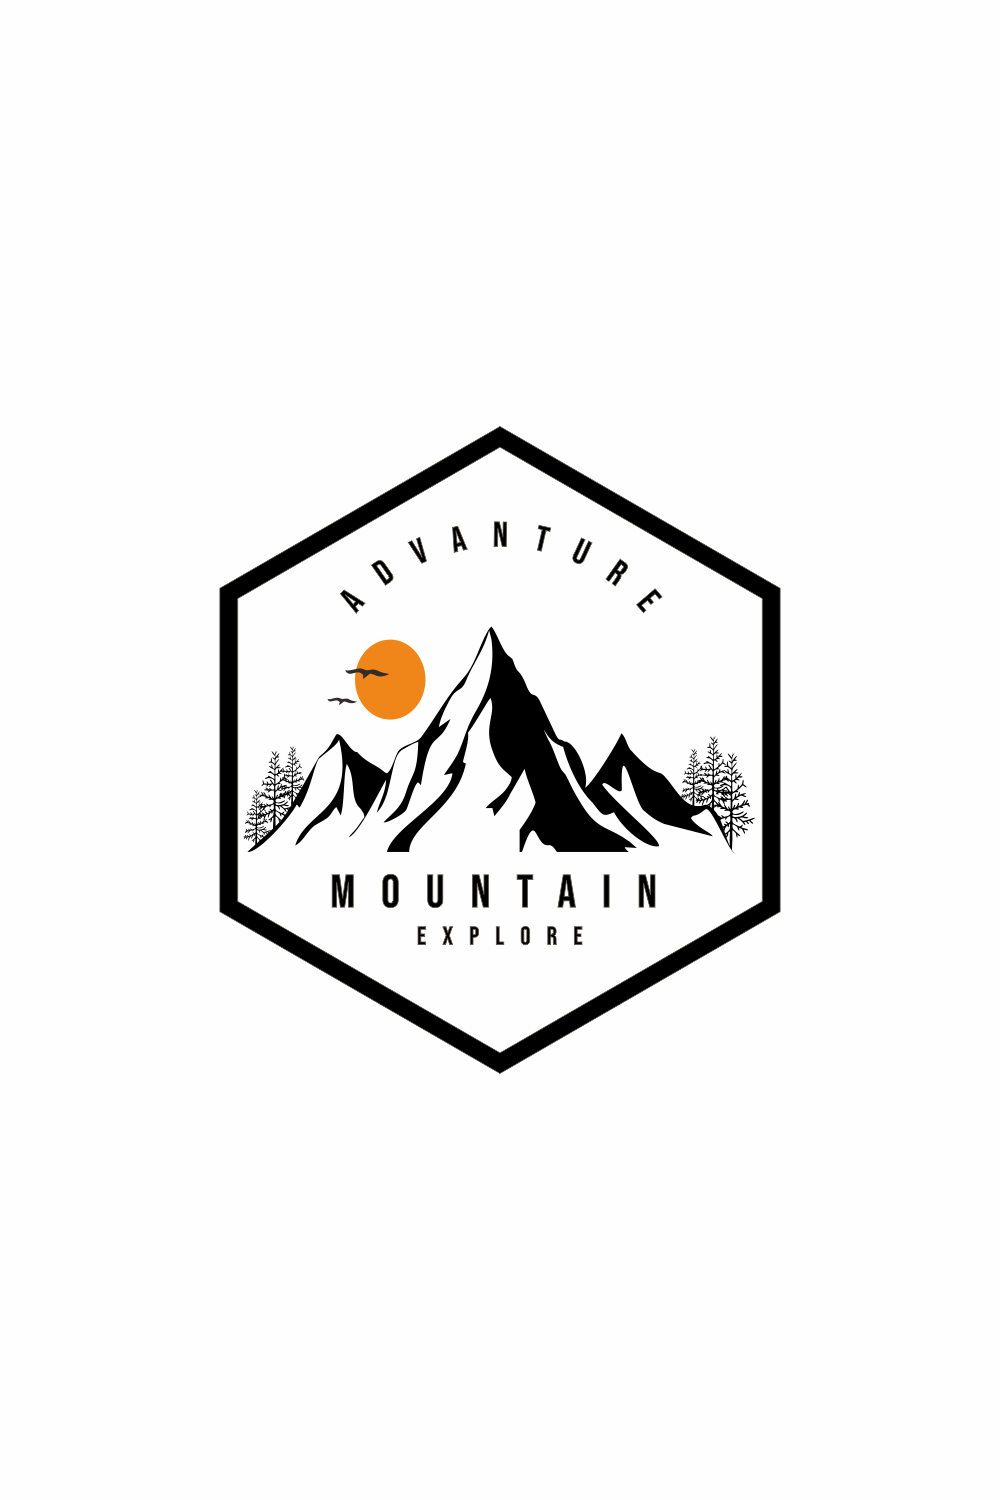 vector mountain and outdoor adventures logo ONLLY 12$ pinterest preview image.